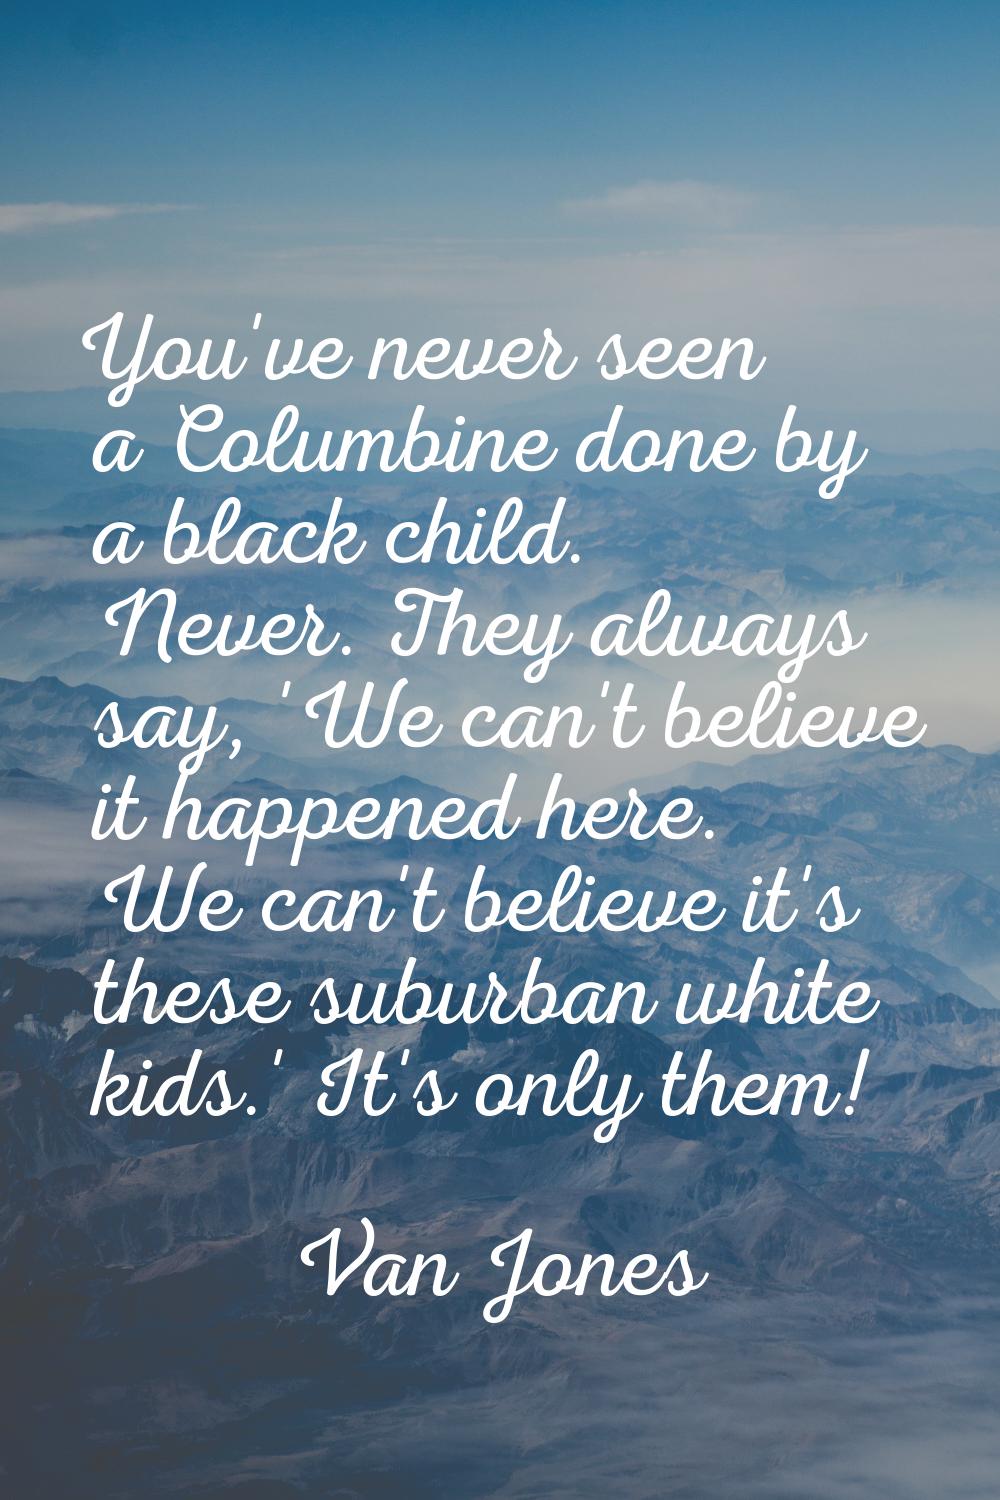 You've never seen a Columbine done by a black child. Never. They always say, 'We can't believe it h